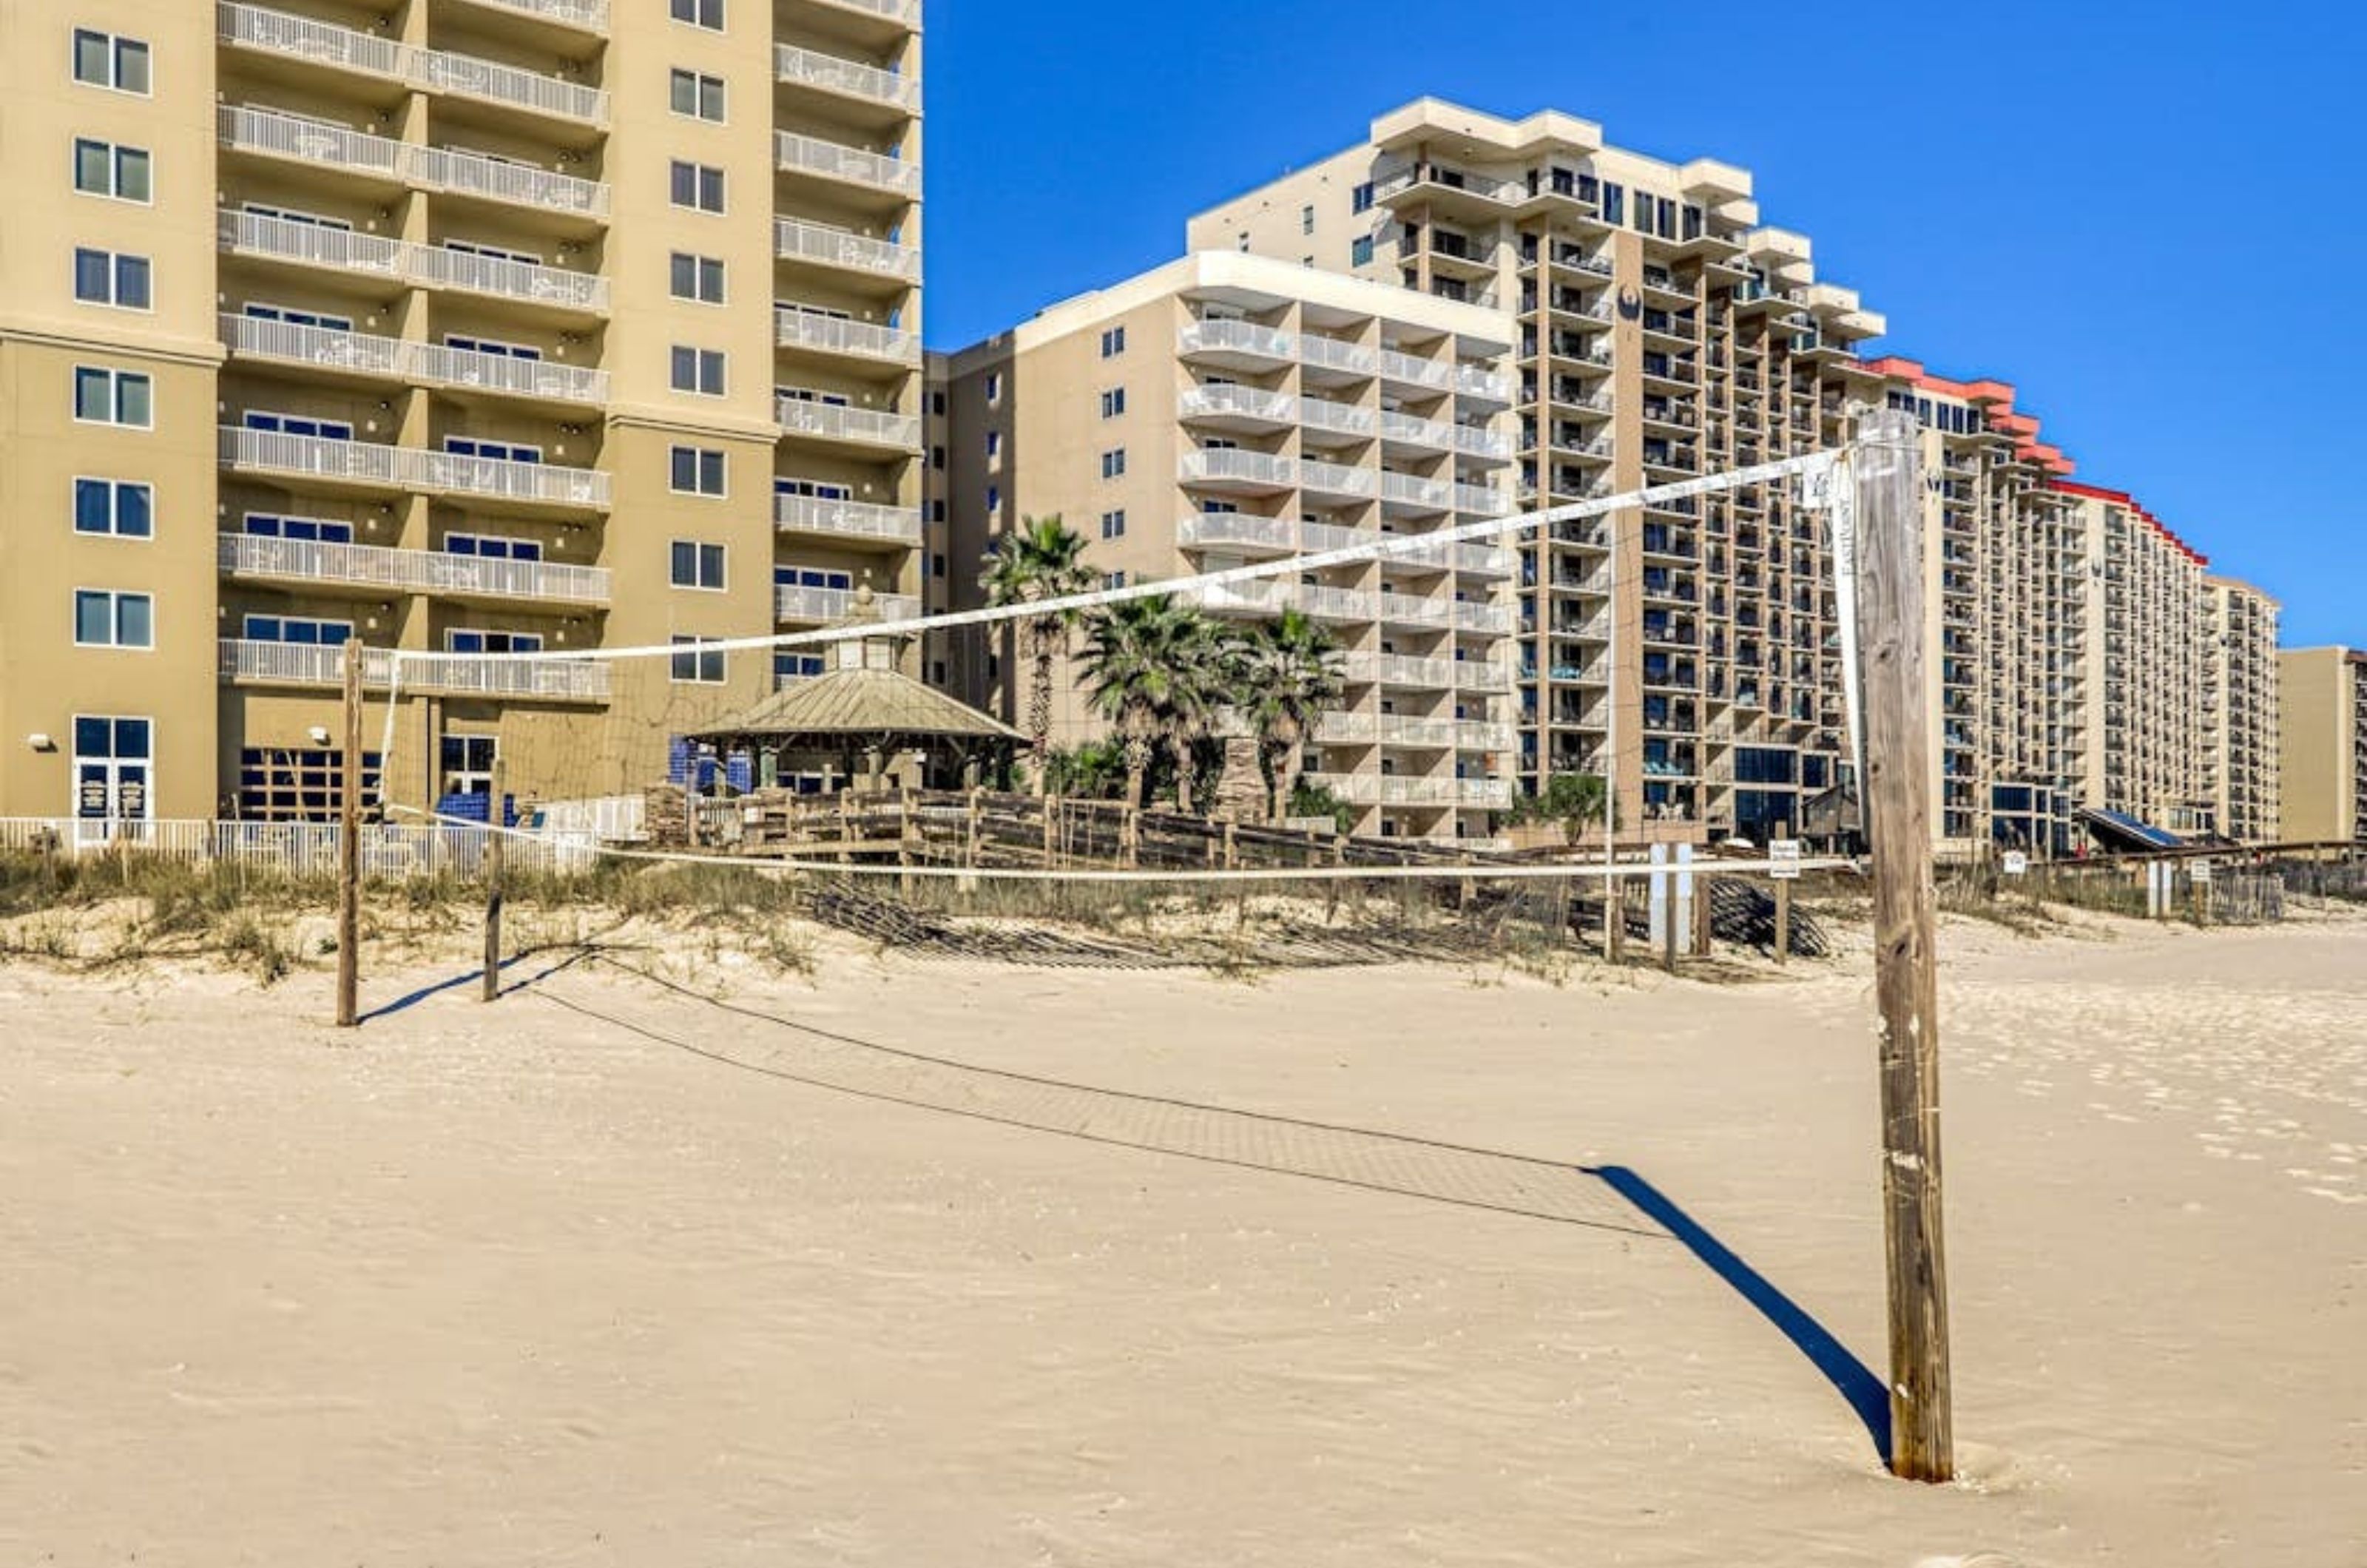 The beach volleyball court in front of Escapes to the Shores in Orange Beach Alabama 